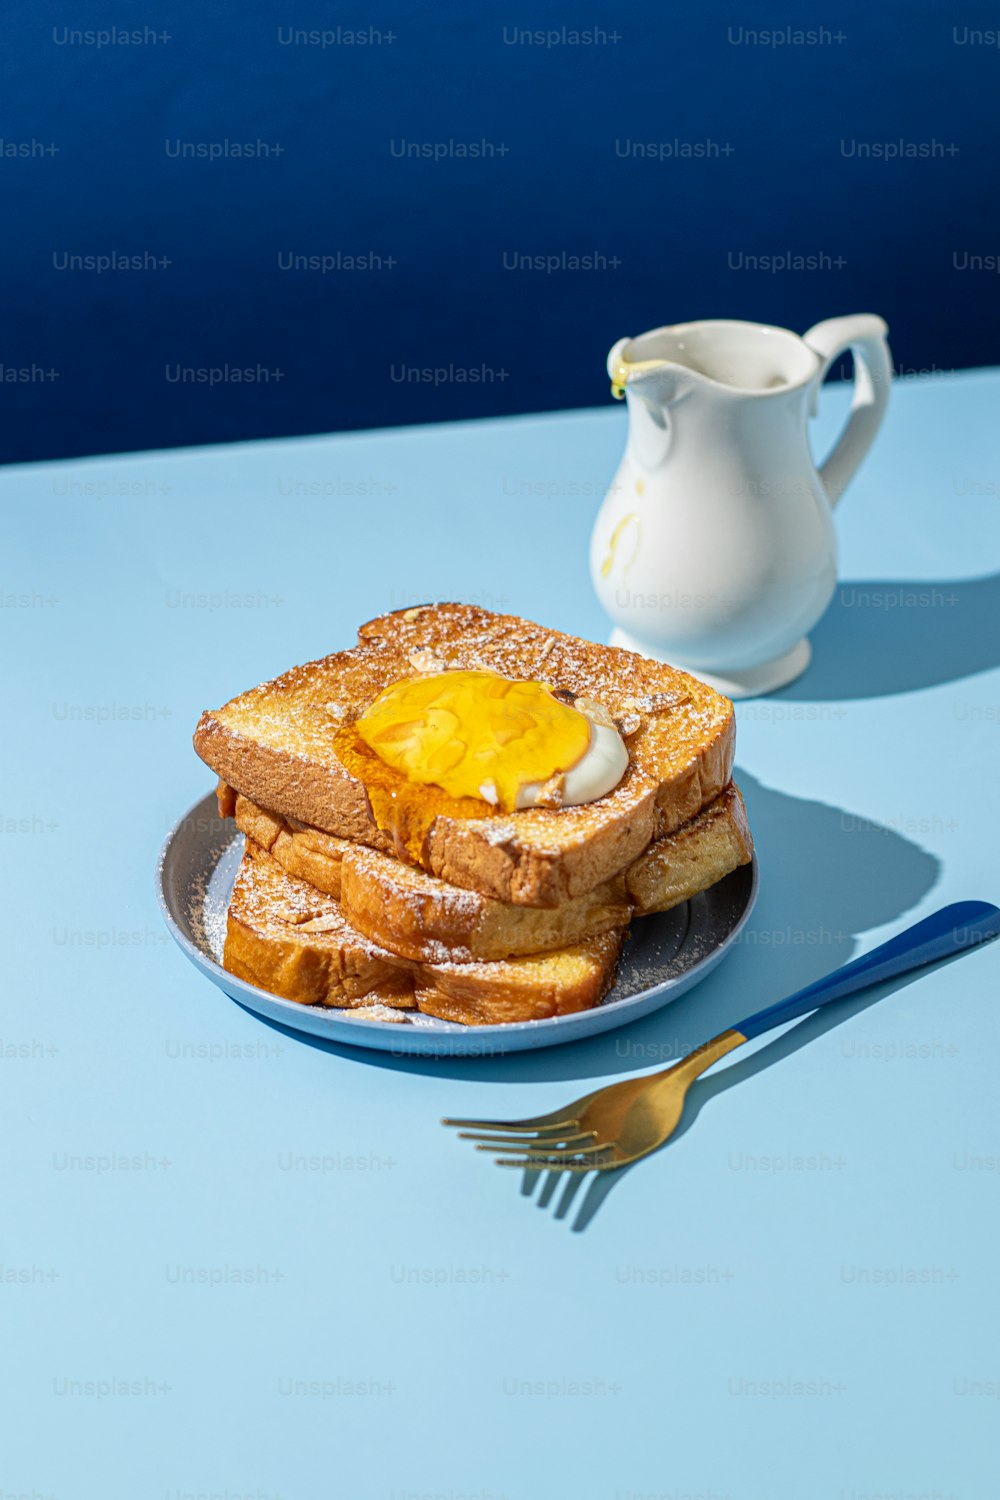 a plate of french toast with an egg on top